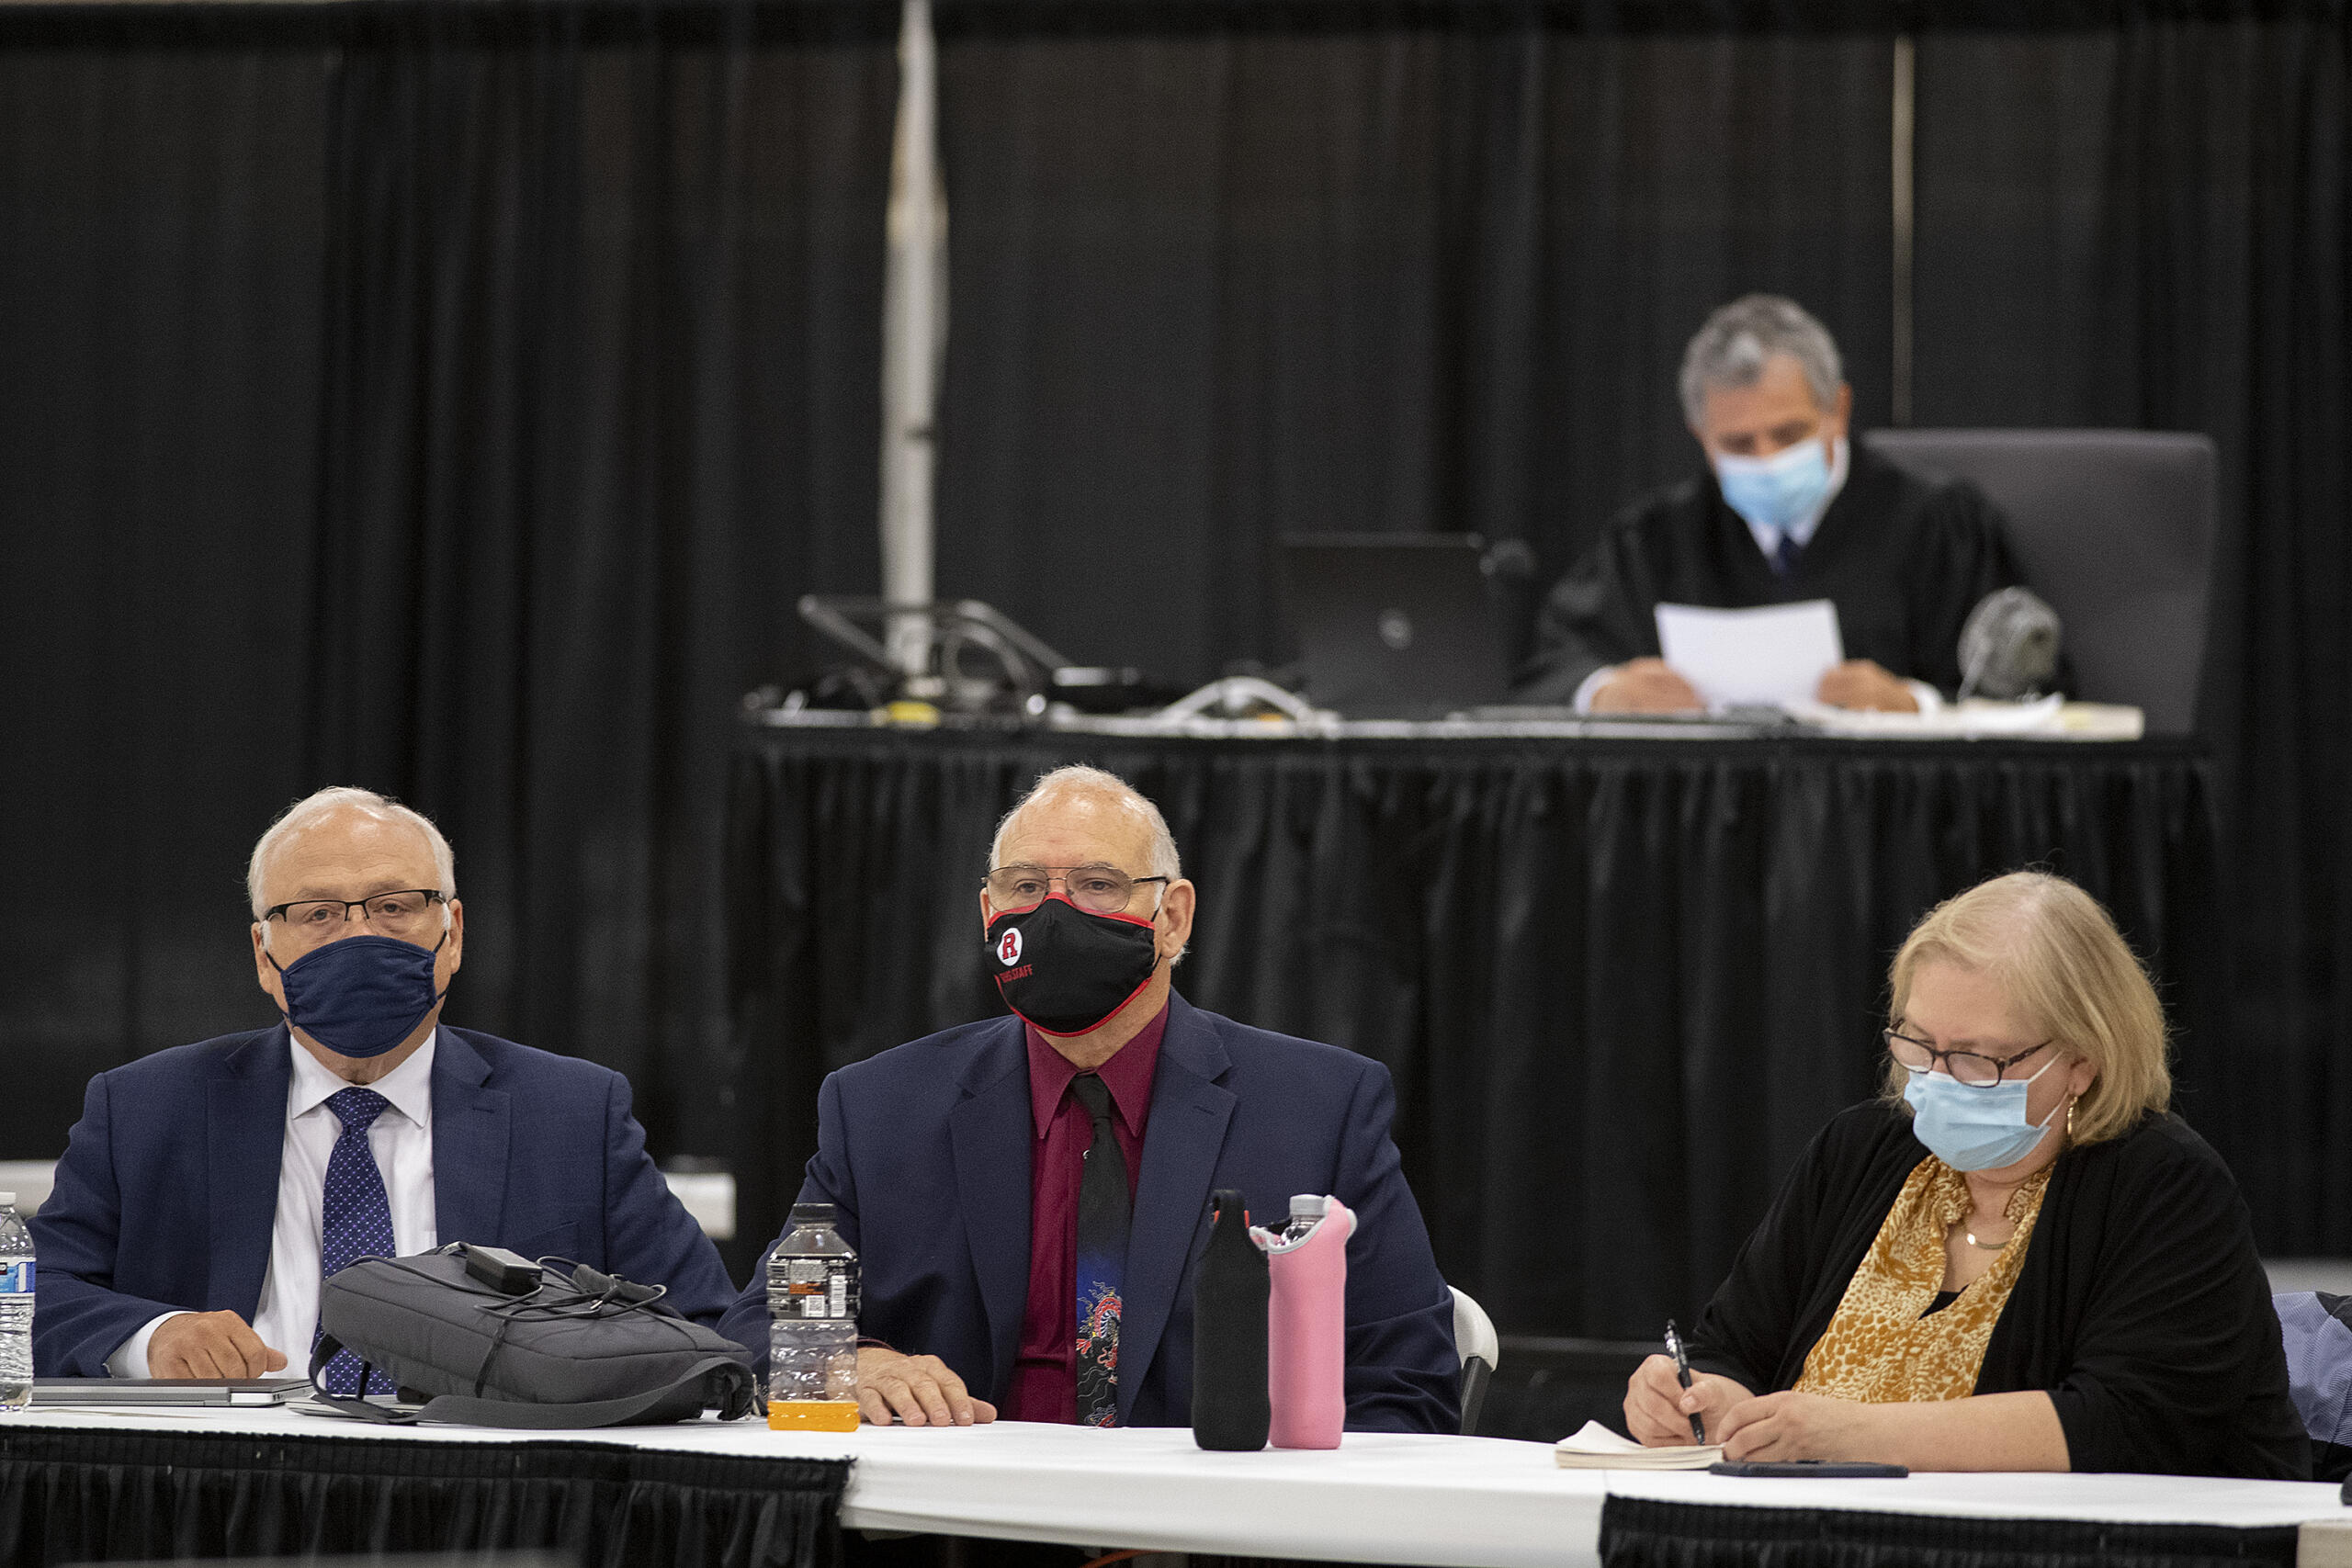 Plaintiffs Don Benton, foreground from left, Christopher Clifford and Susan Rice join Judge Gregory Gonzales, background top, as they gather for closing arguments at the Clark County Event Center at the Fairgrounds on May 17.